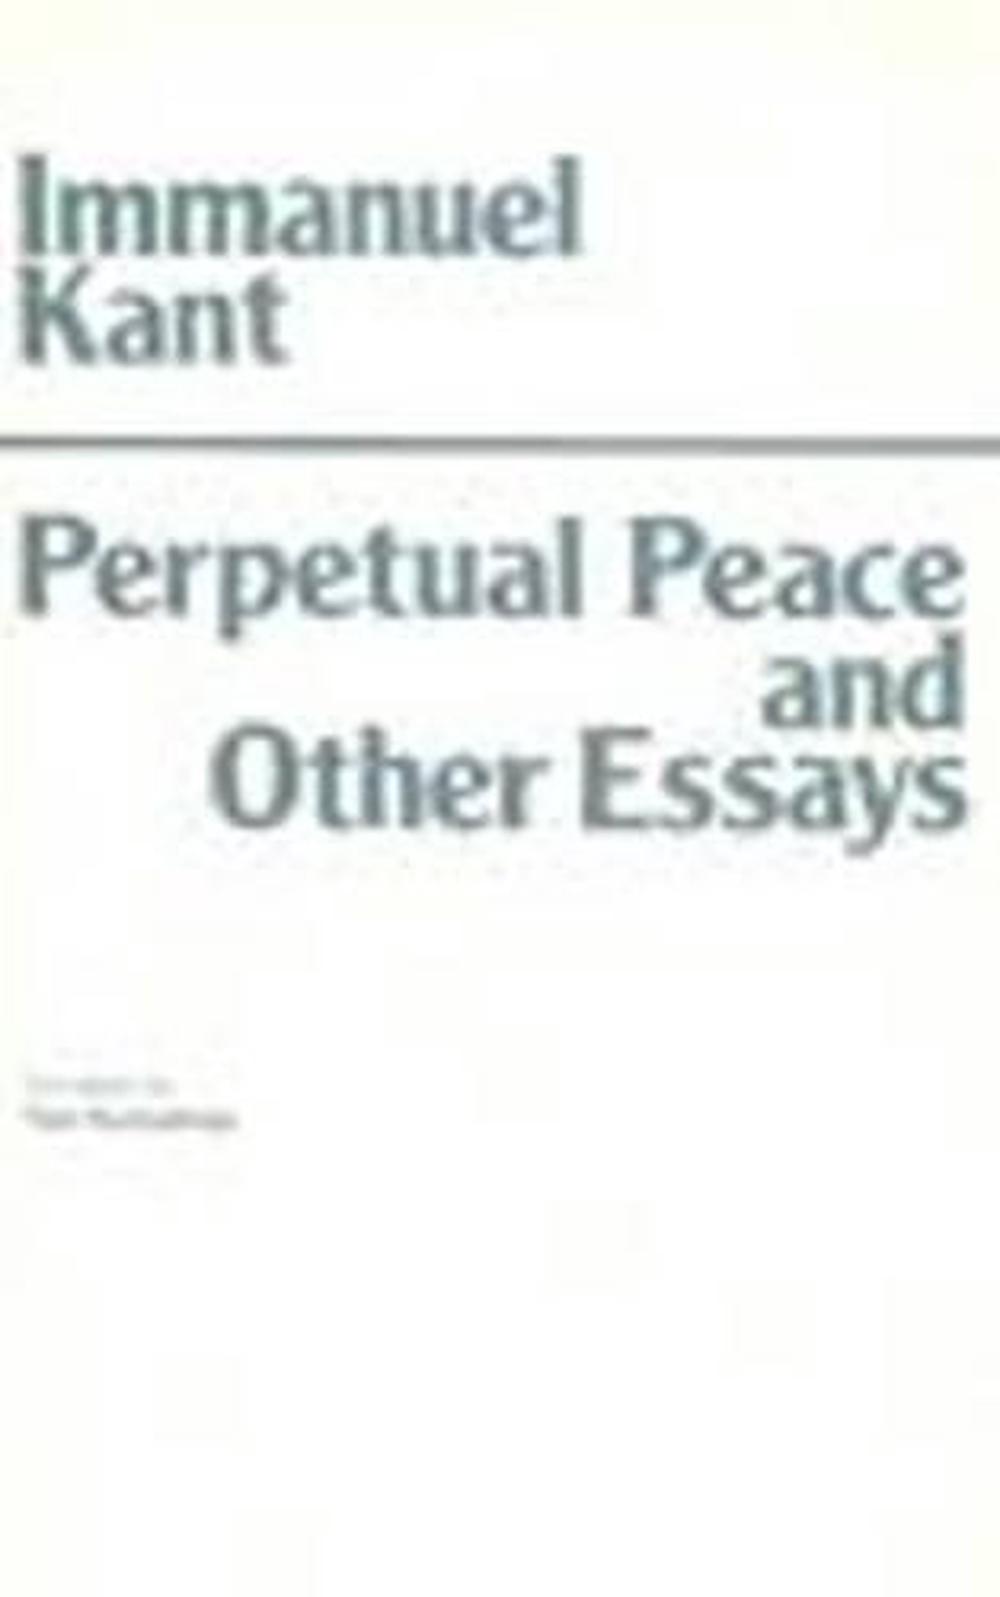 perpetual peace essays on kant's cosmopolitan ideal